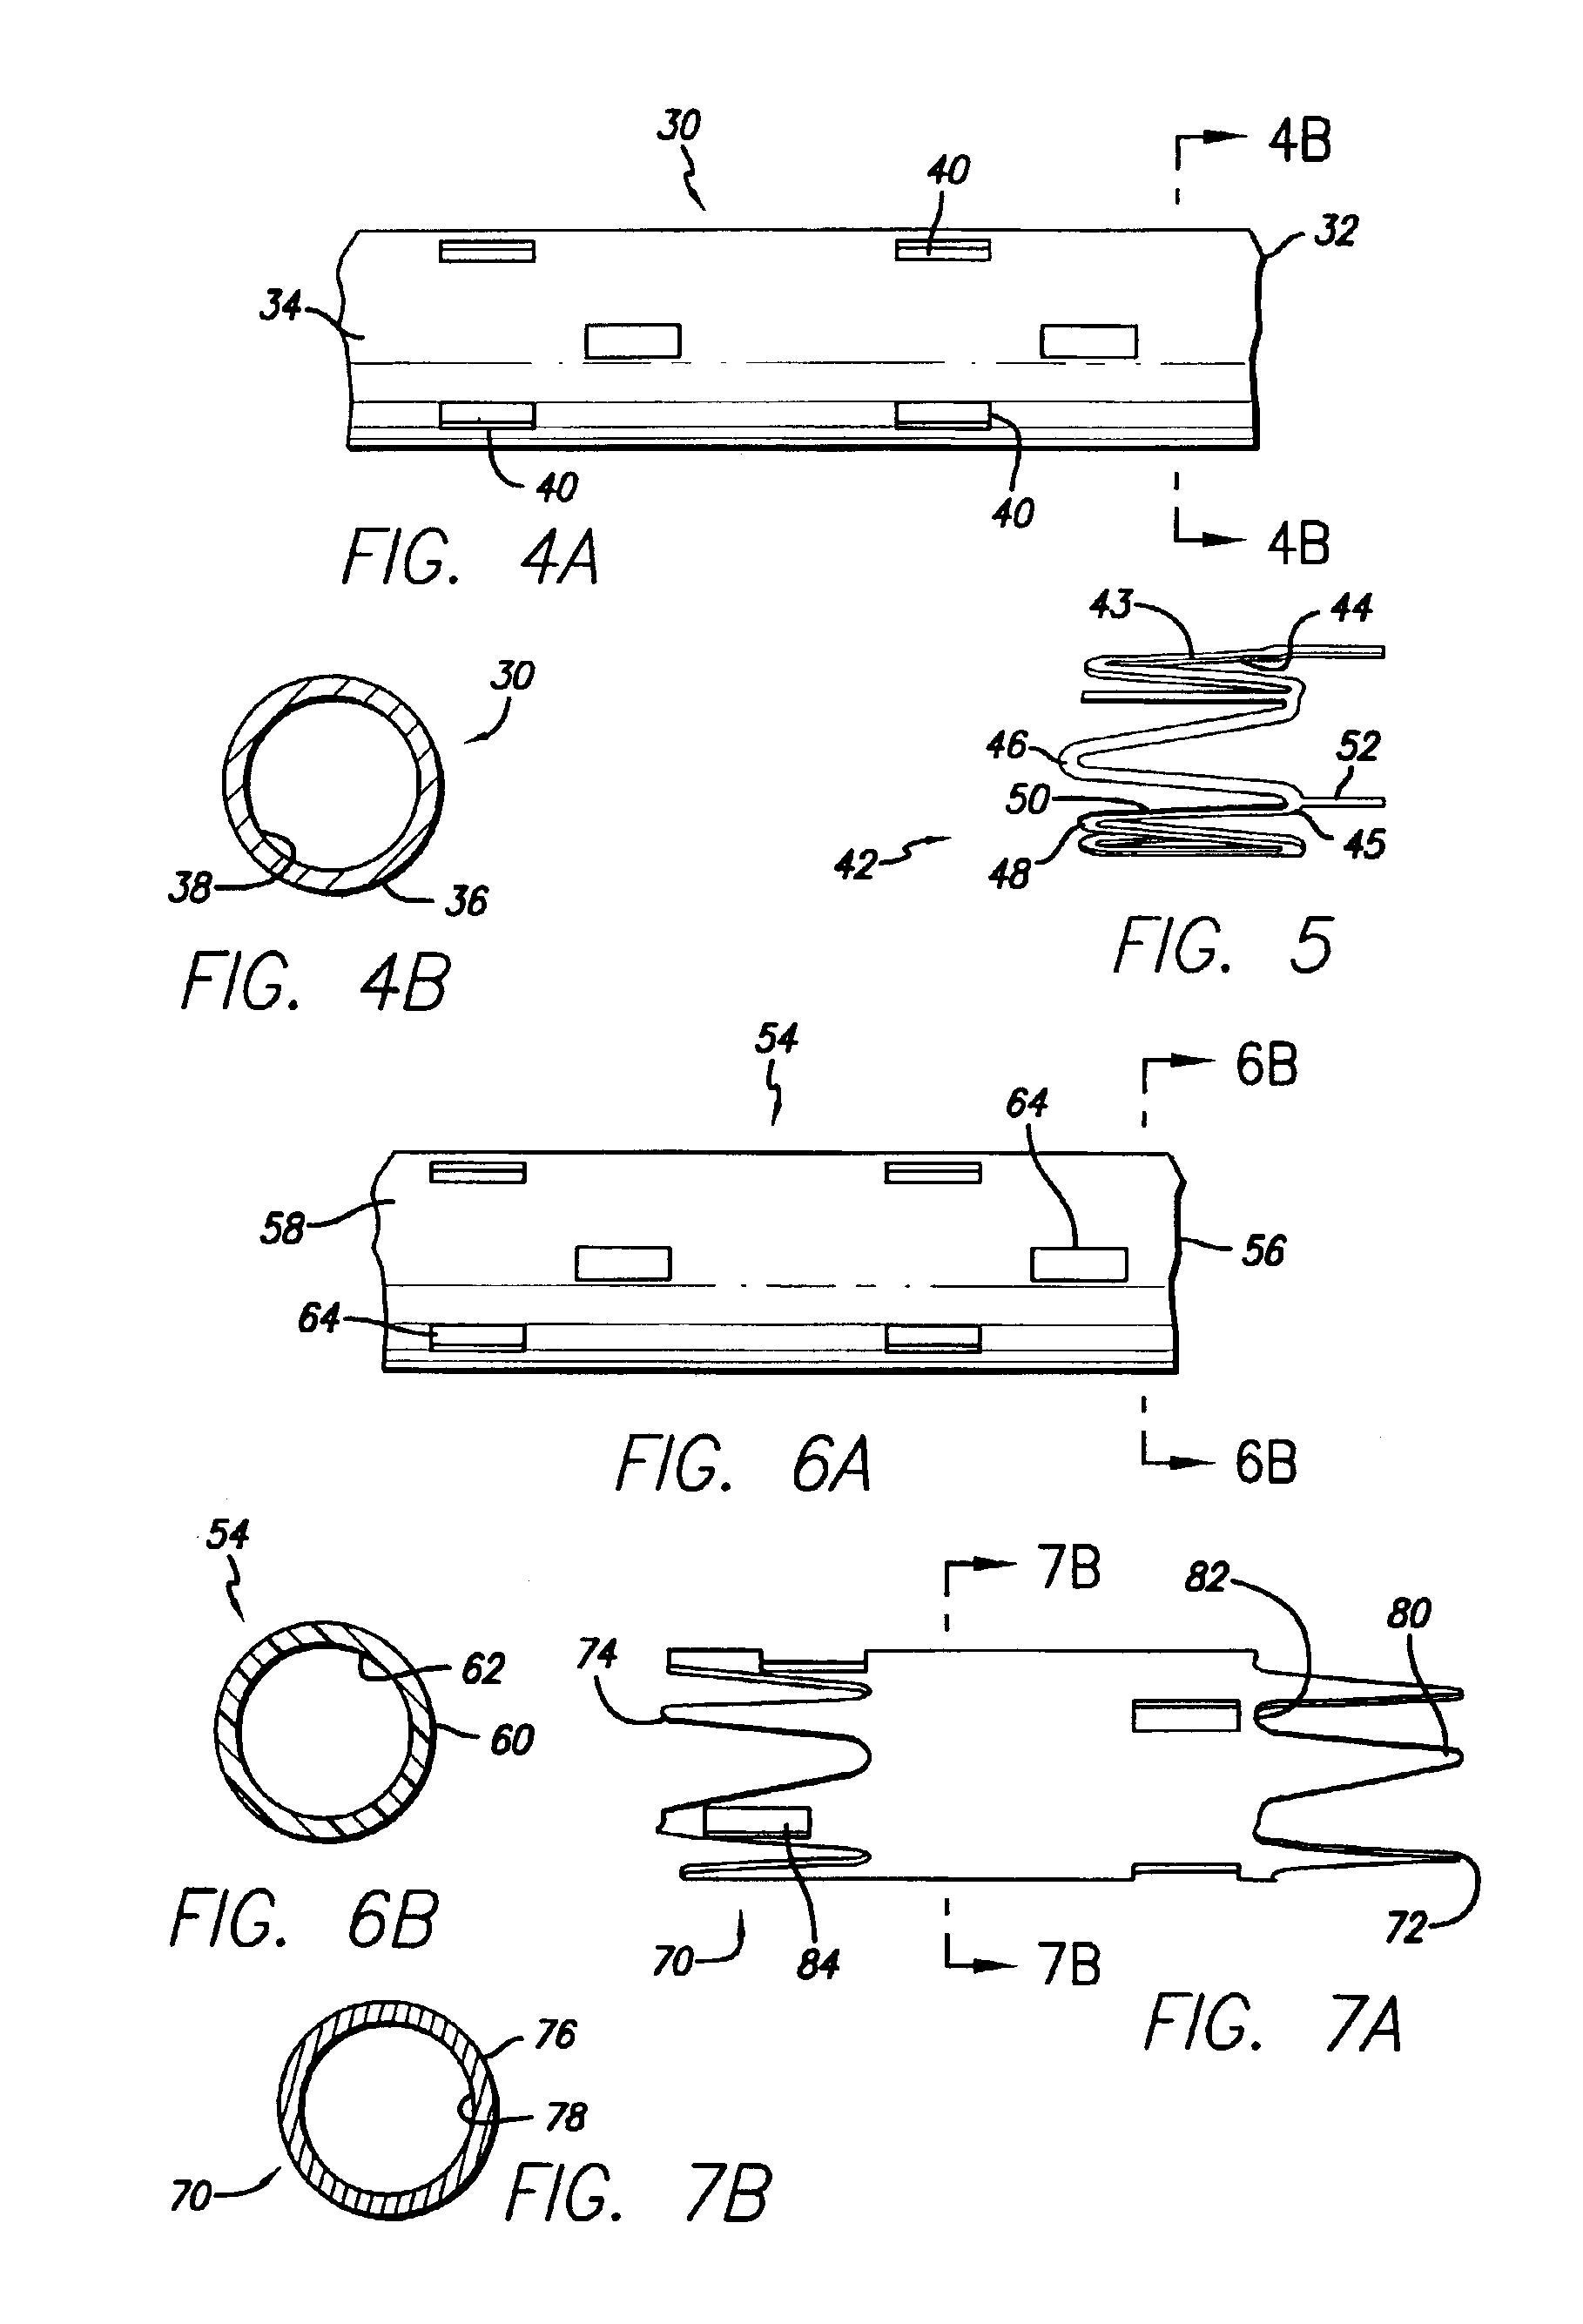 Apparatus and process for electrolytic removal of material from a medical device